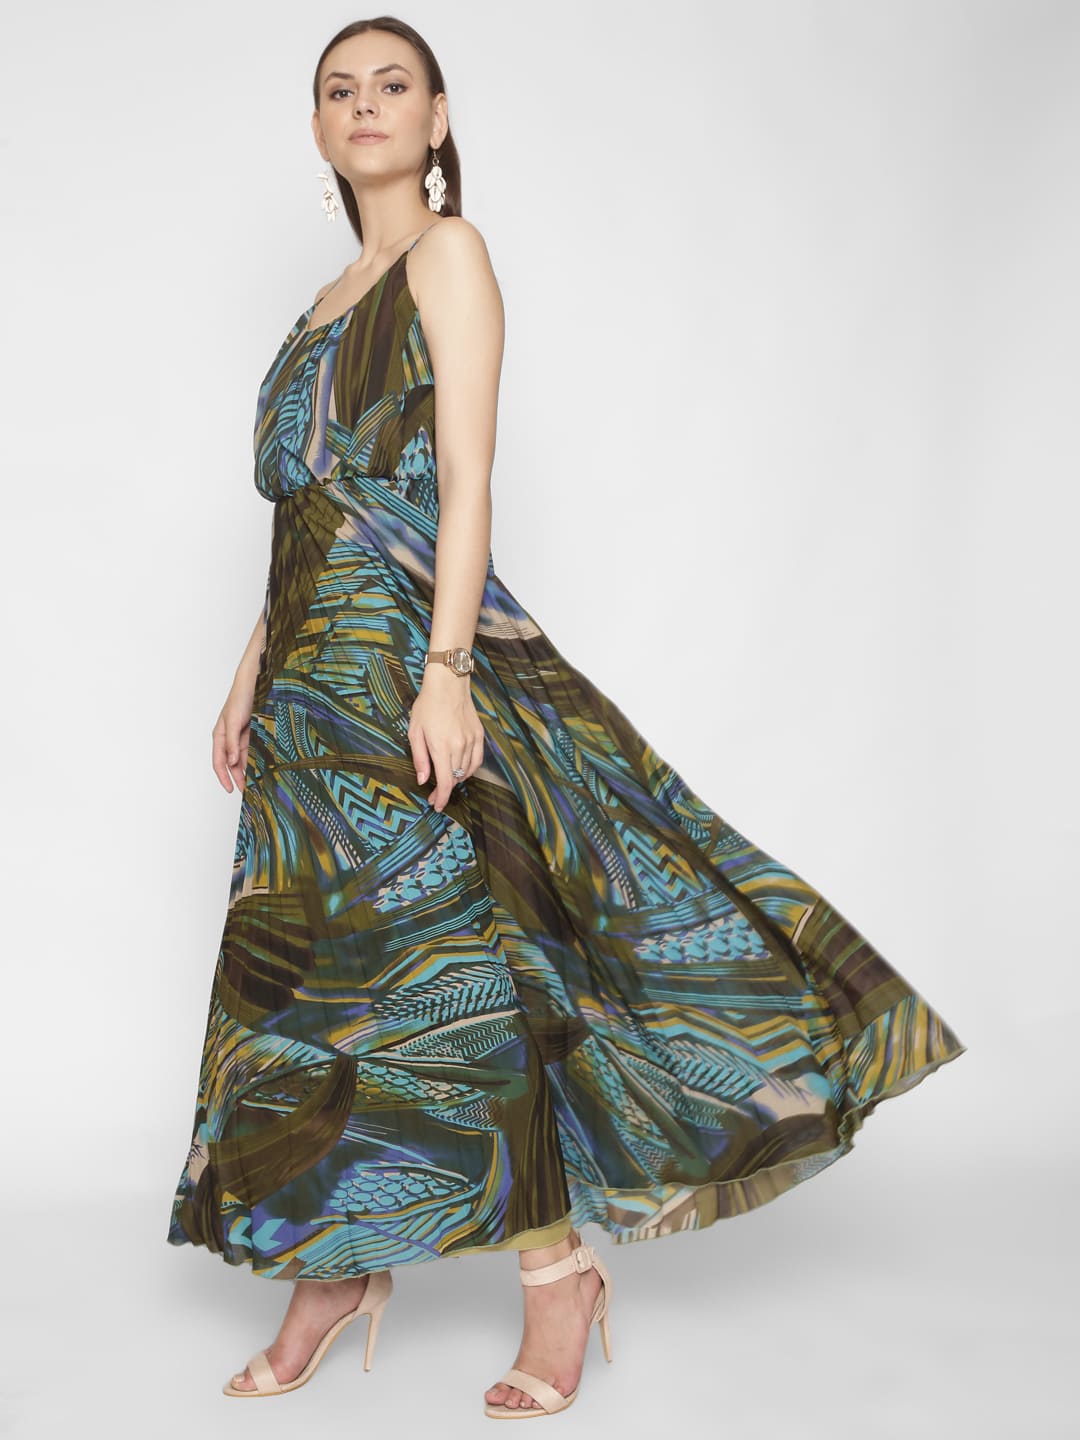 Strappy Olive Floral Printed Maxi Dress